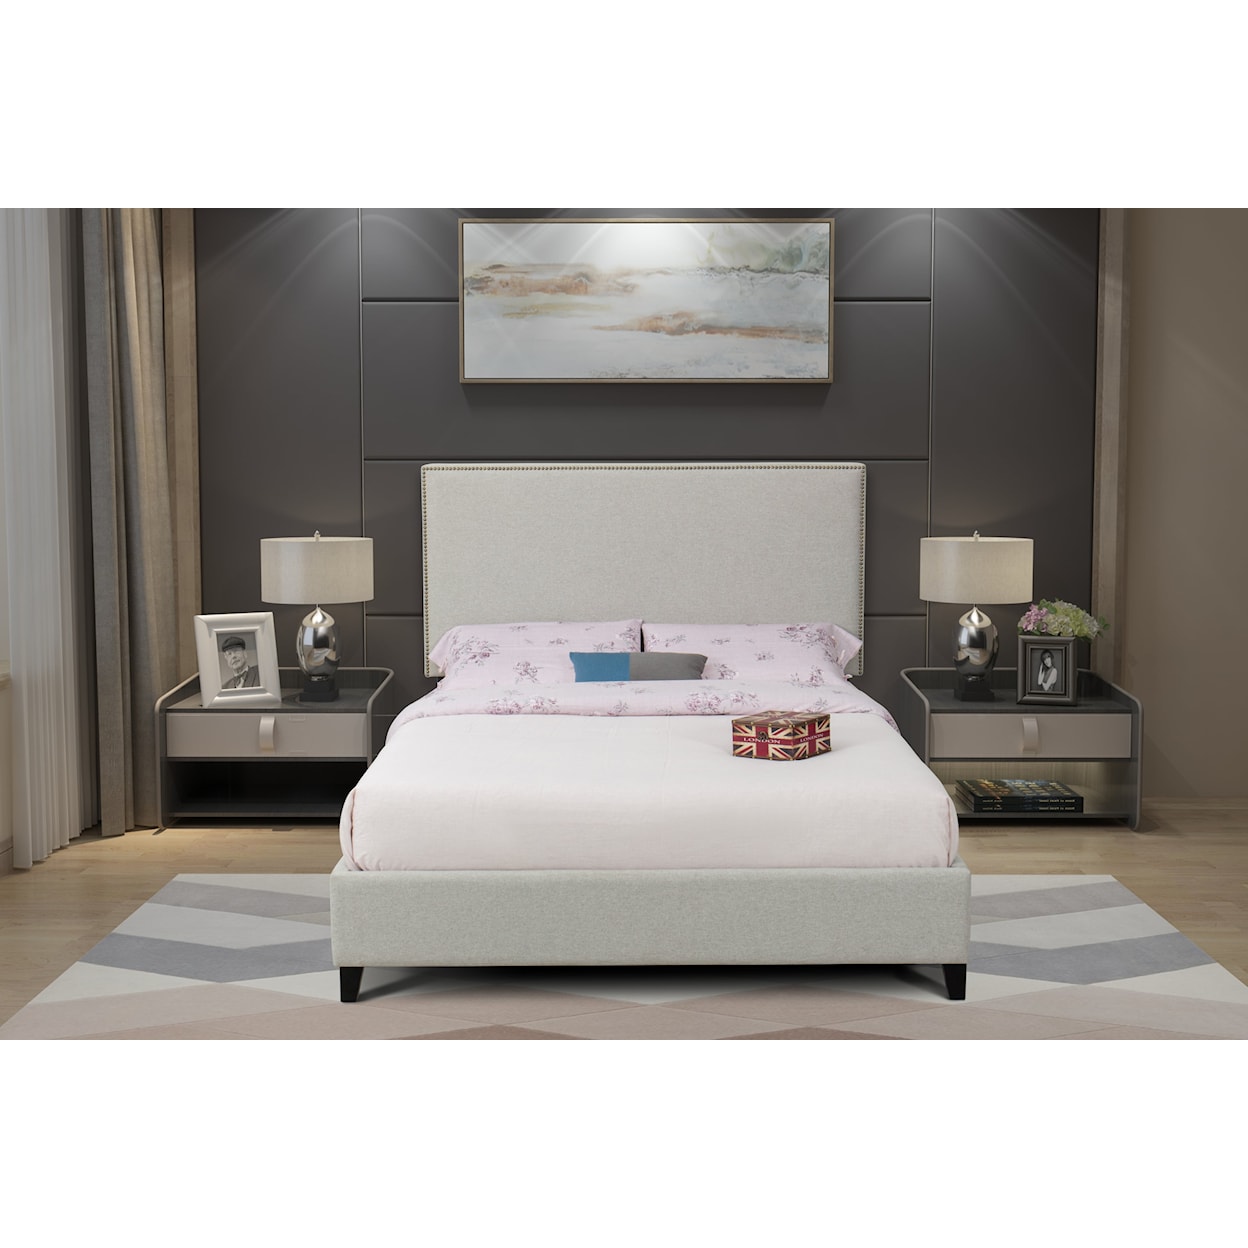 South Bay International Madison Queen Bed Frame